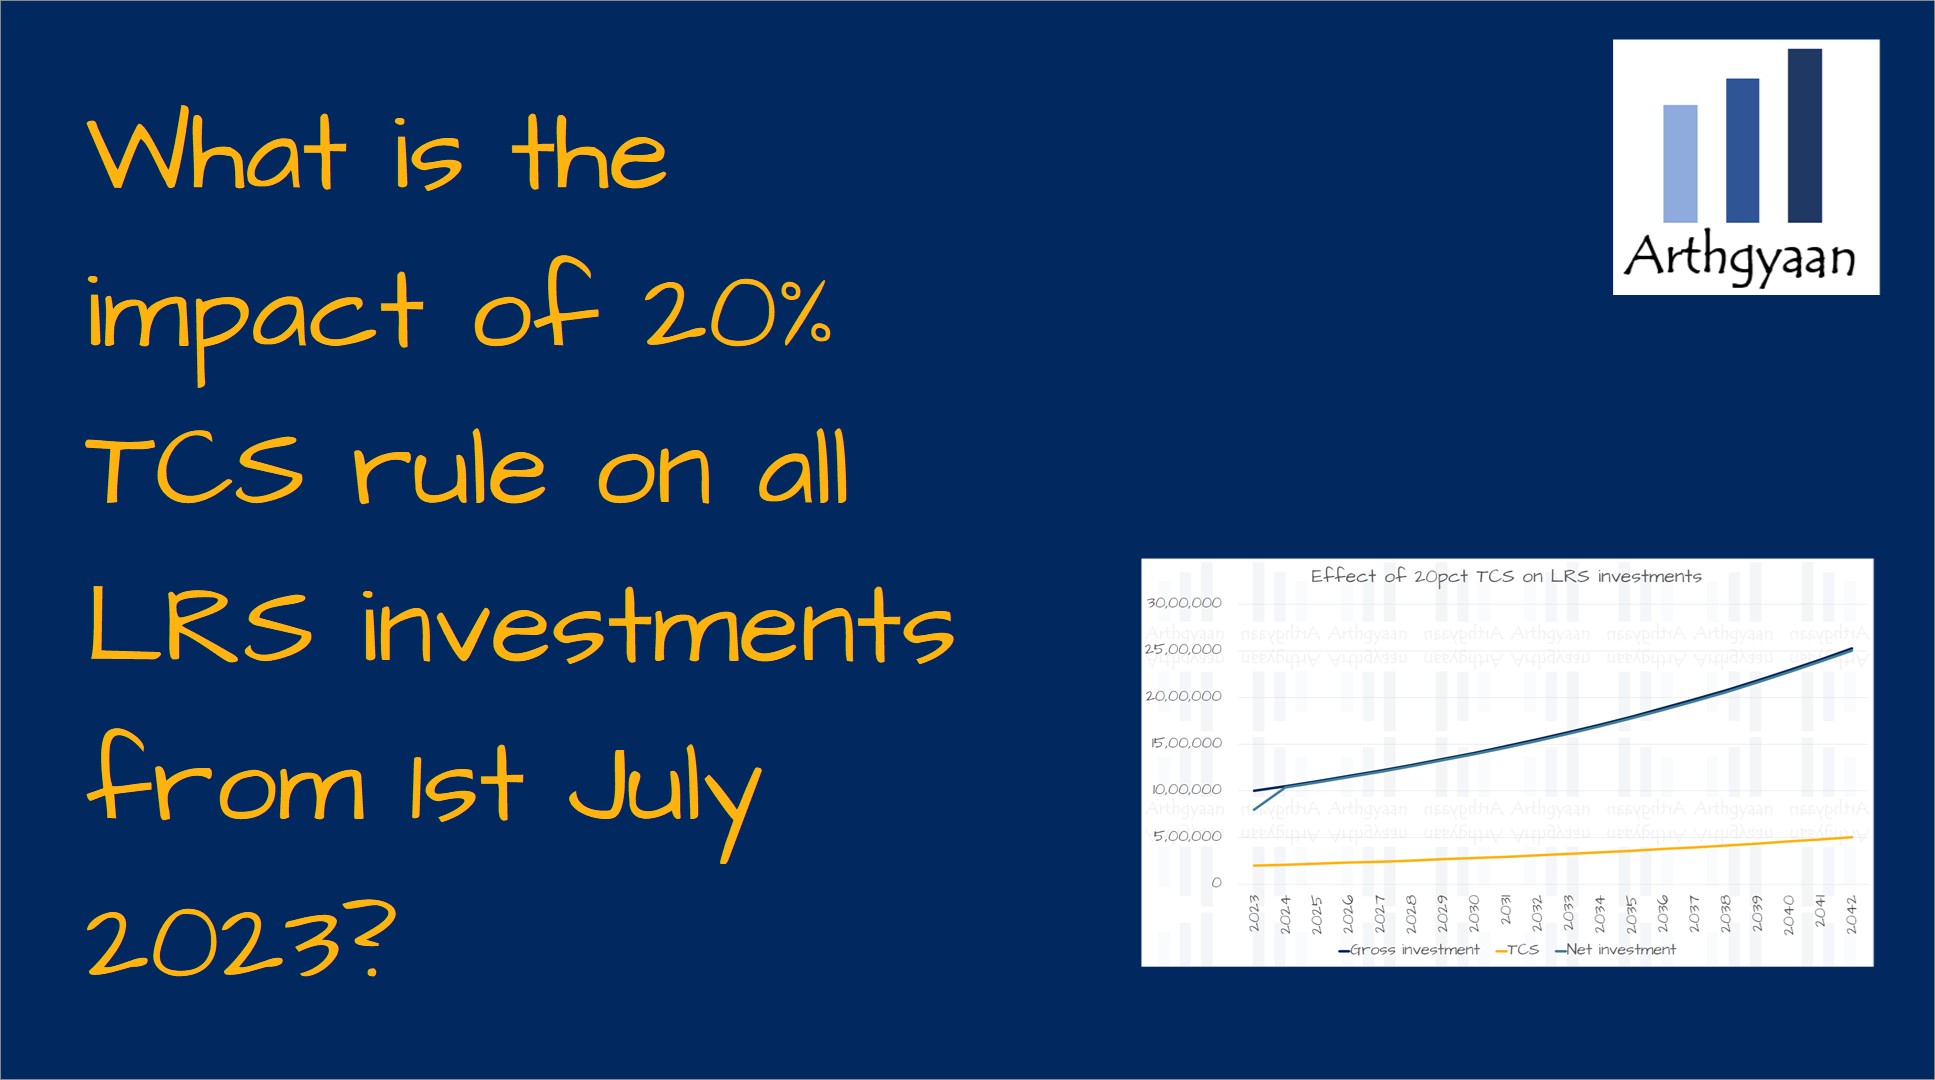 What is the impact of 20% TCS rule on all LRS investments from 1st July 2023?